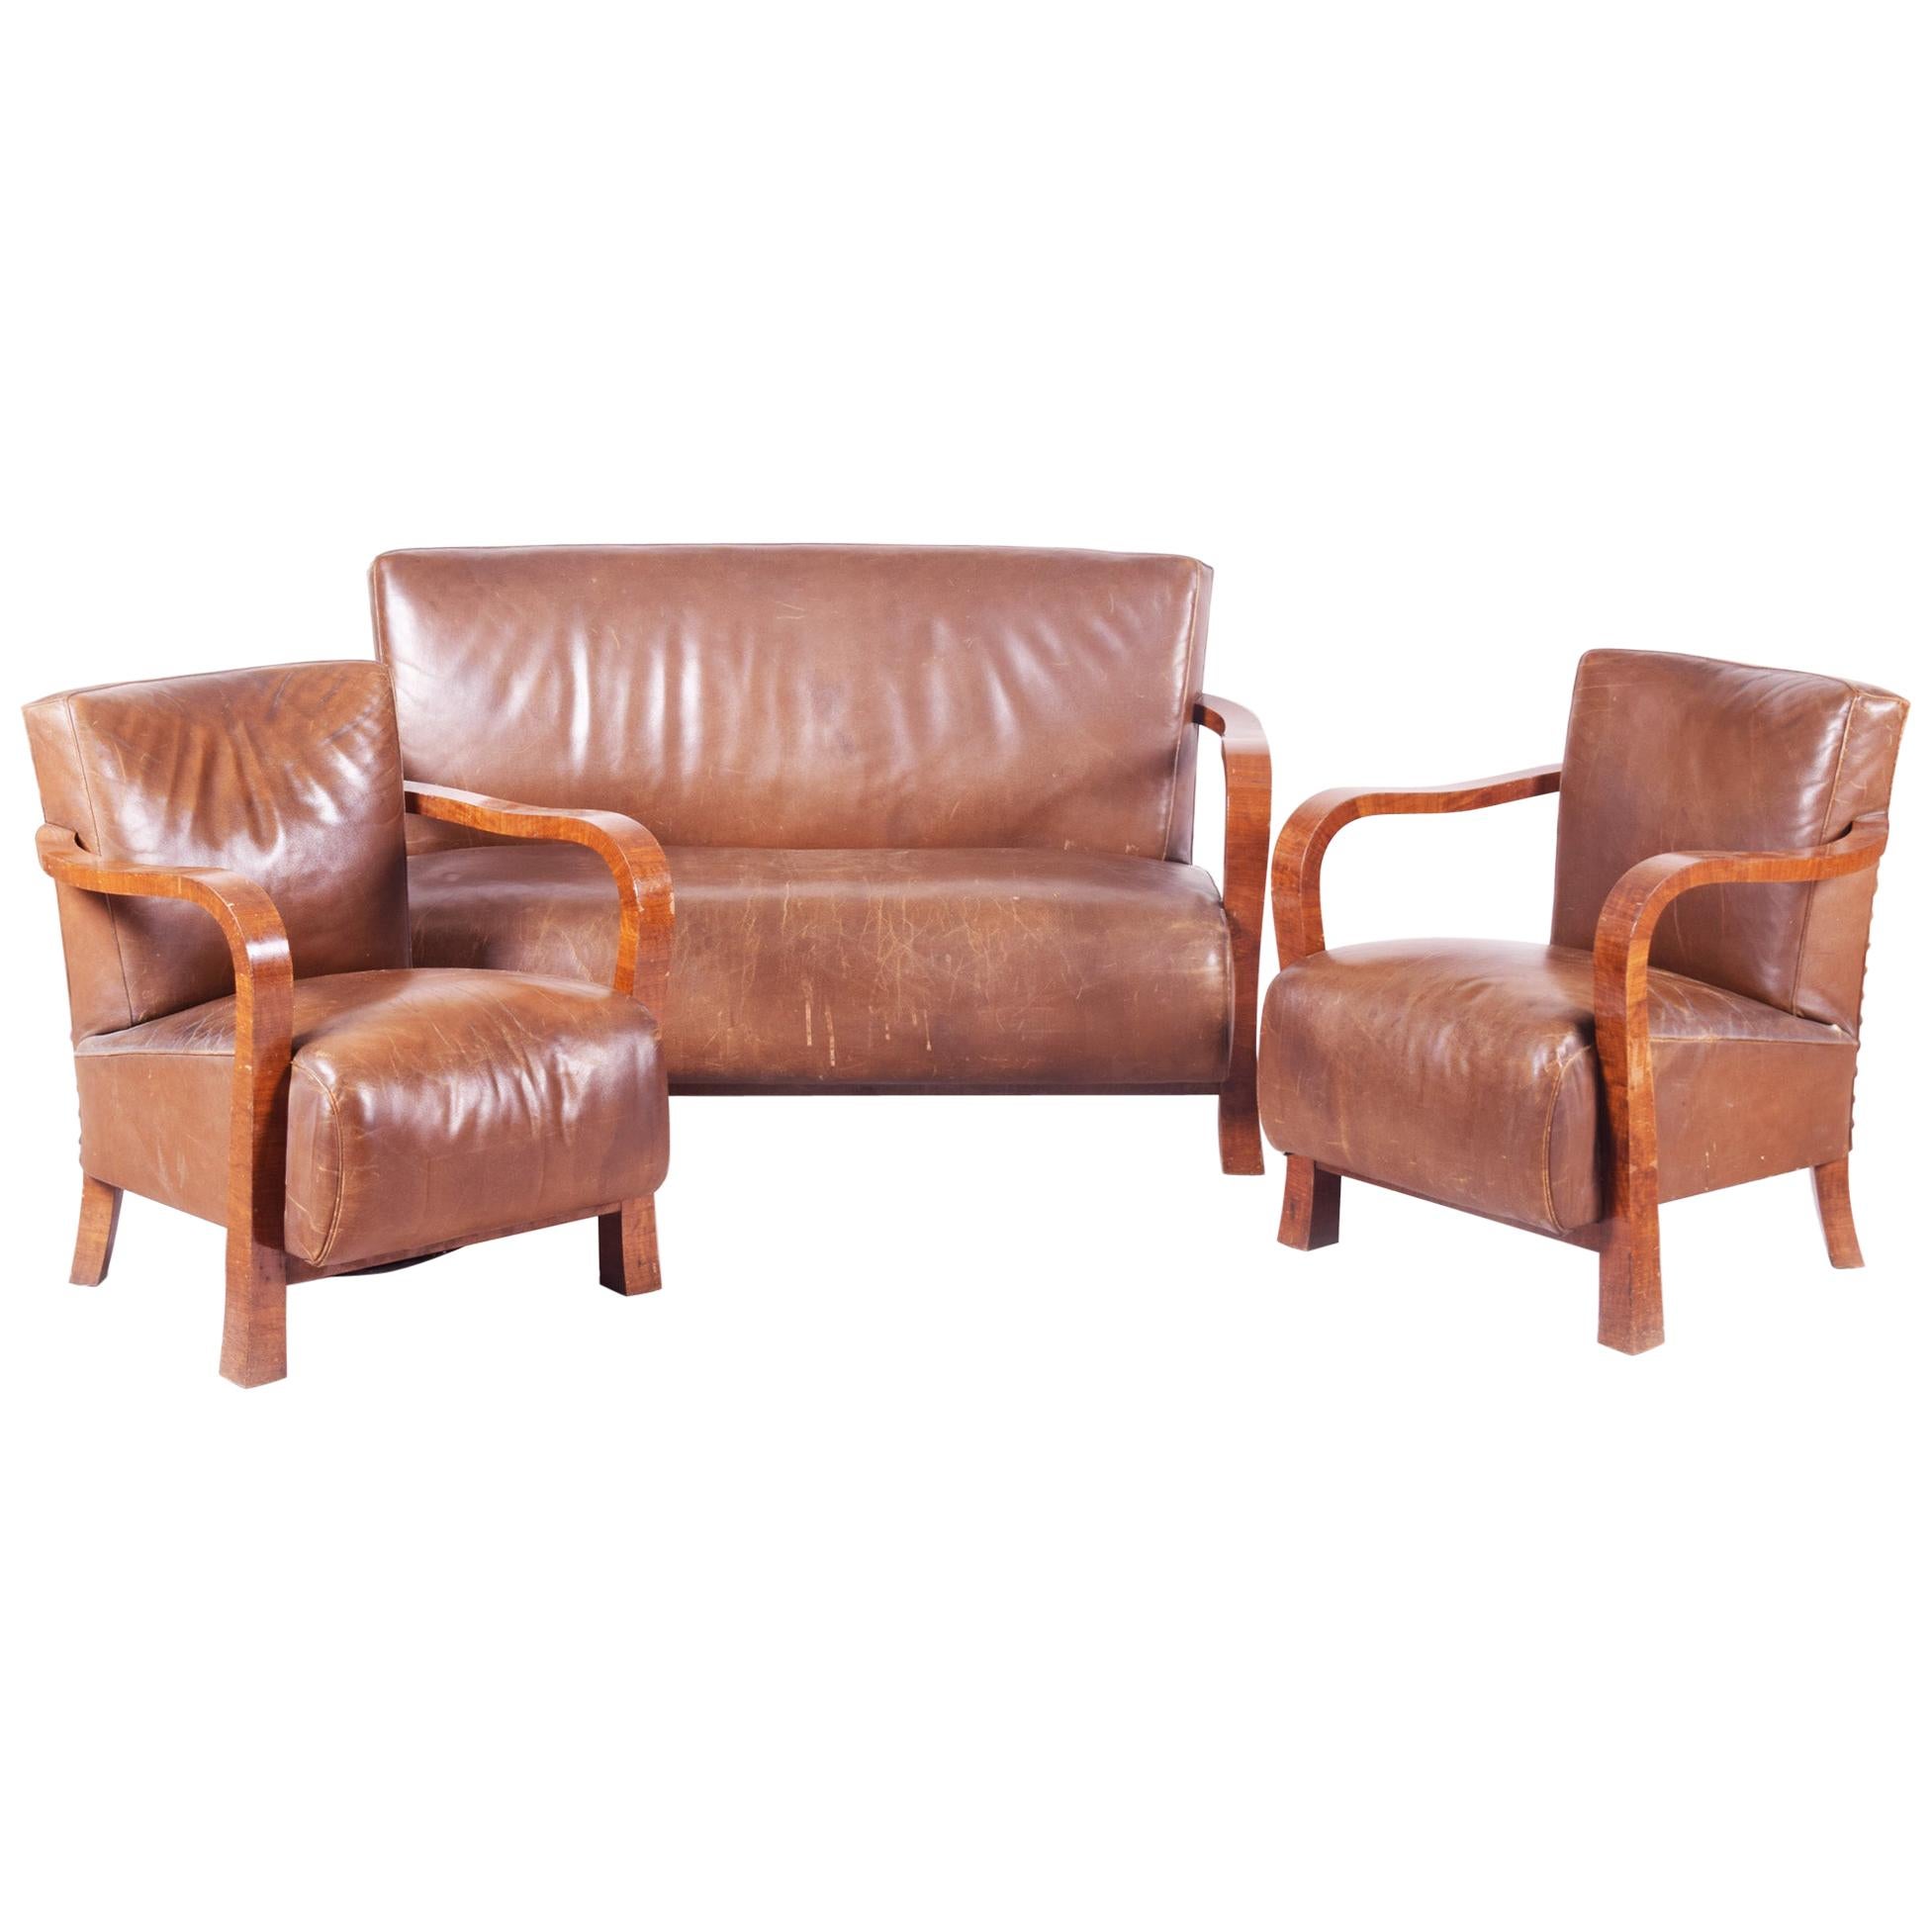 Brown Walnut Art Deco Three-Piece Suite, Preserved Condition and Leather, 1930s For Sale